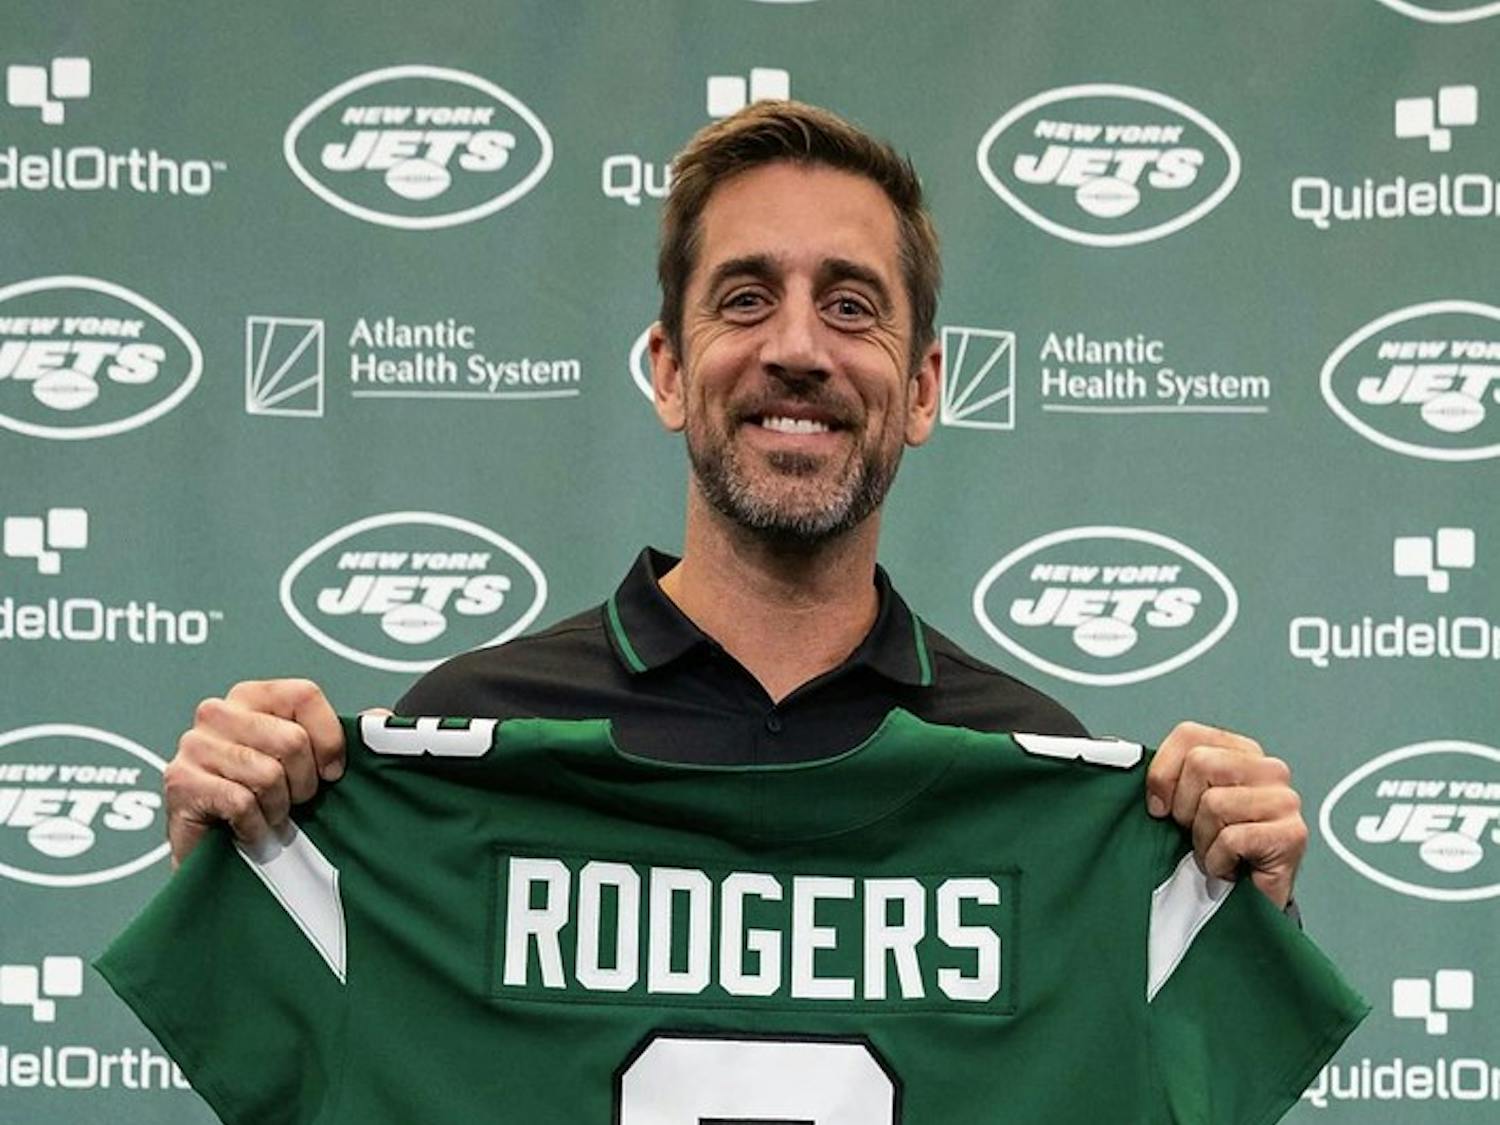 Jets new quarterback Aaron Rodgers at his introductory press conference on April 26, 2023 (Photo Courtesy of MikeyStrikes/Flickr).